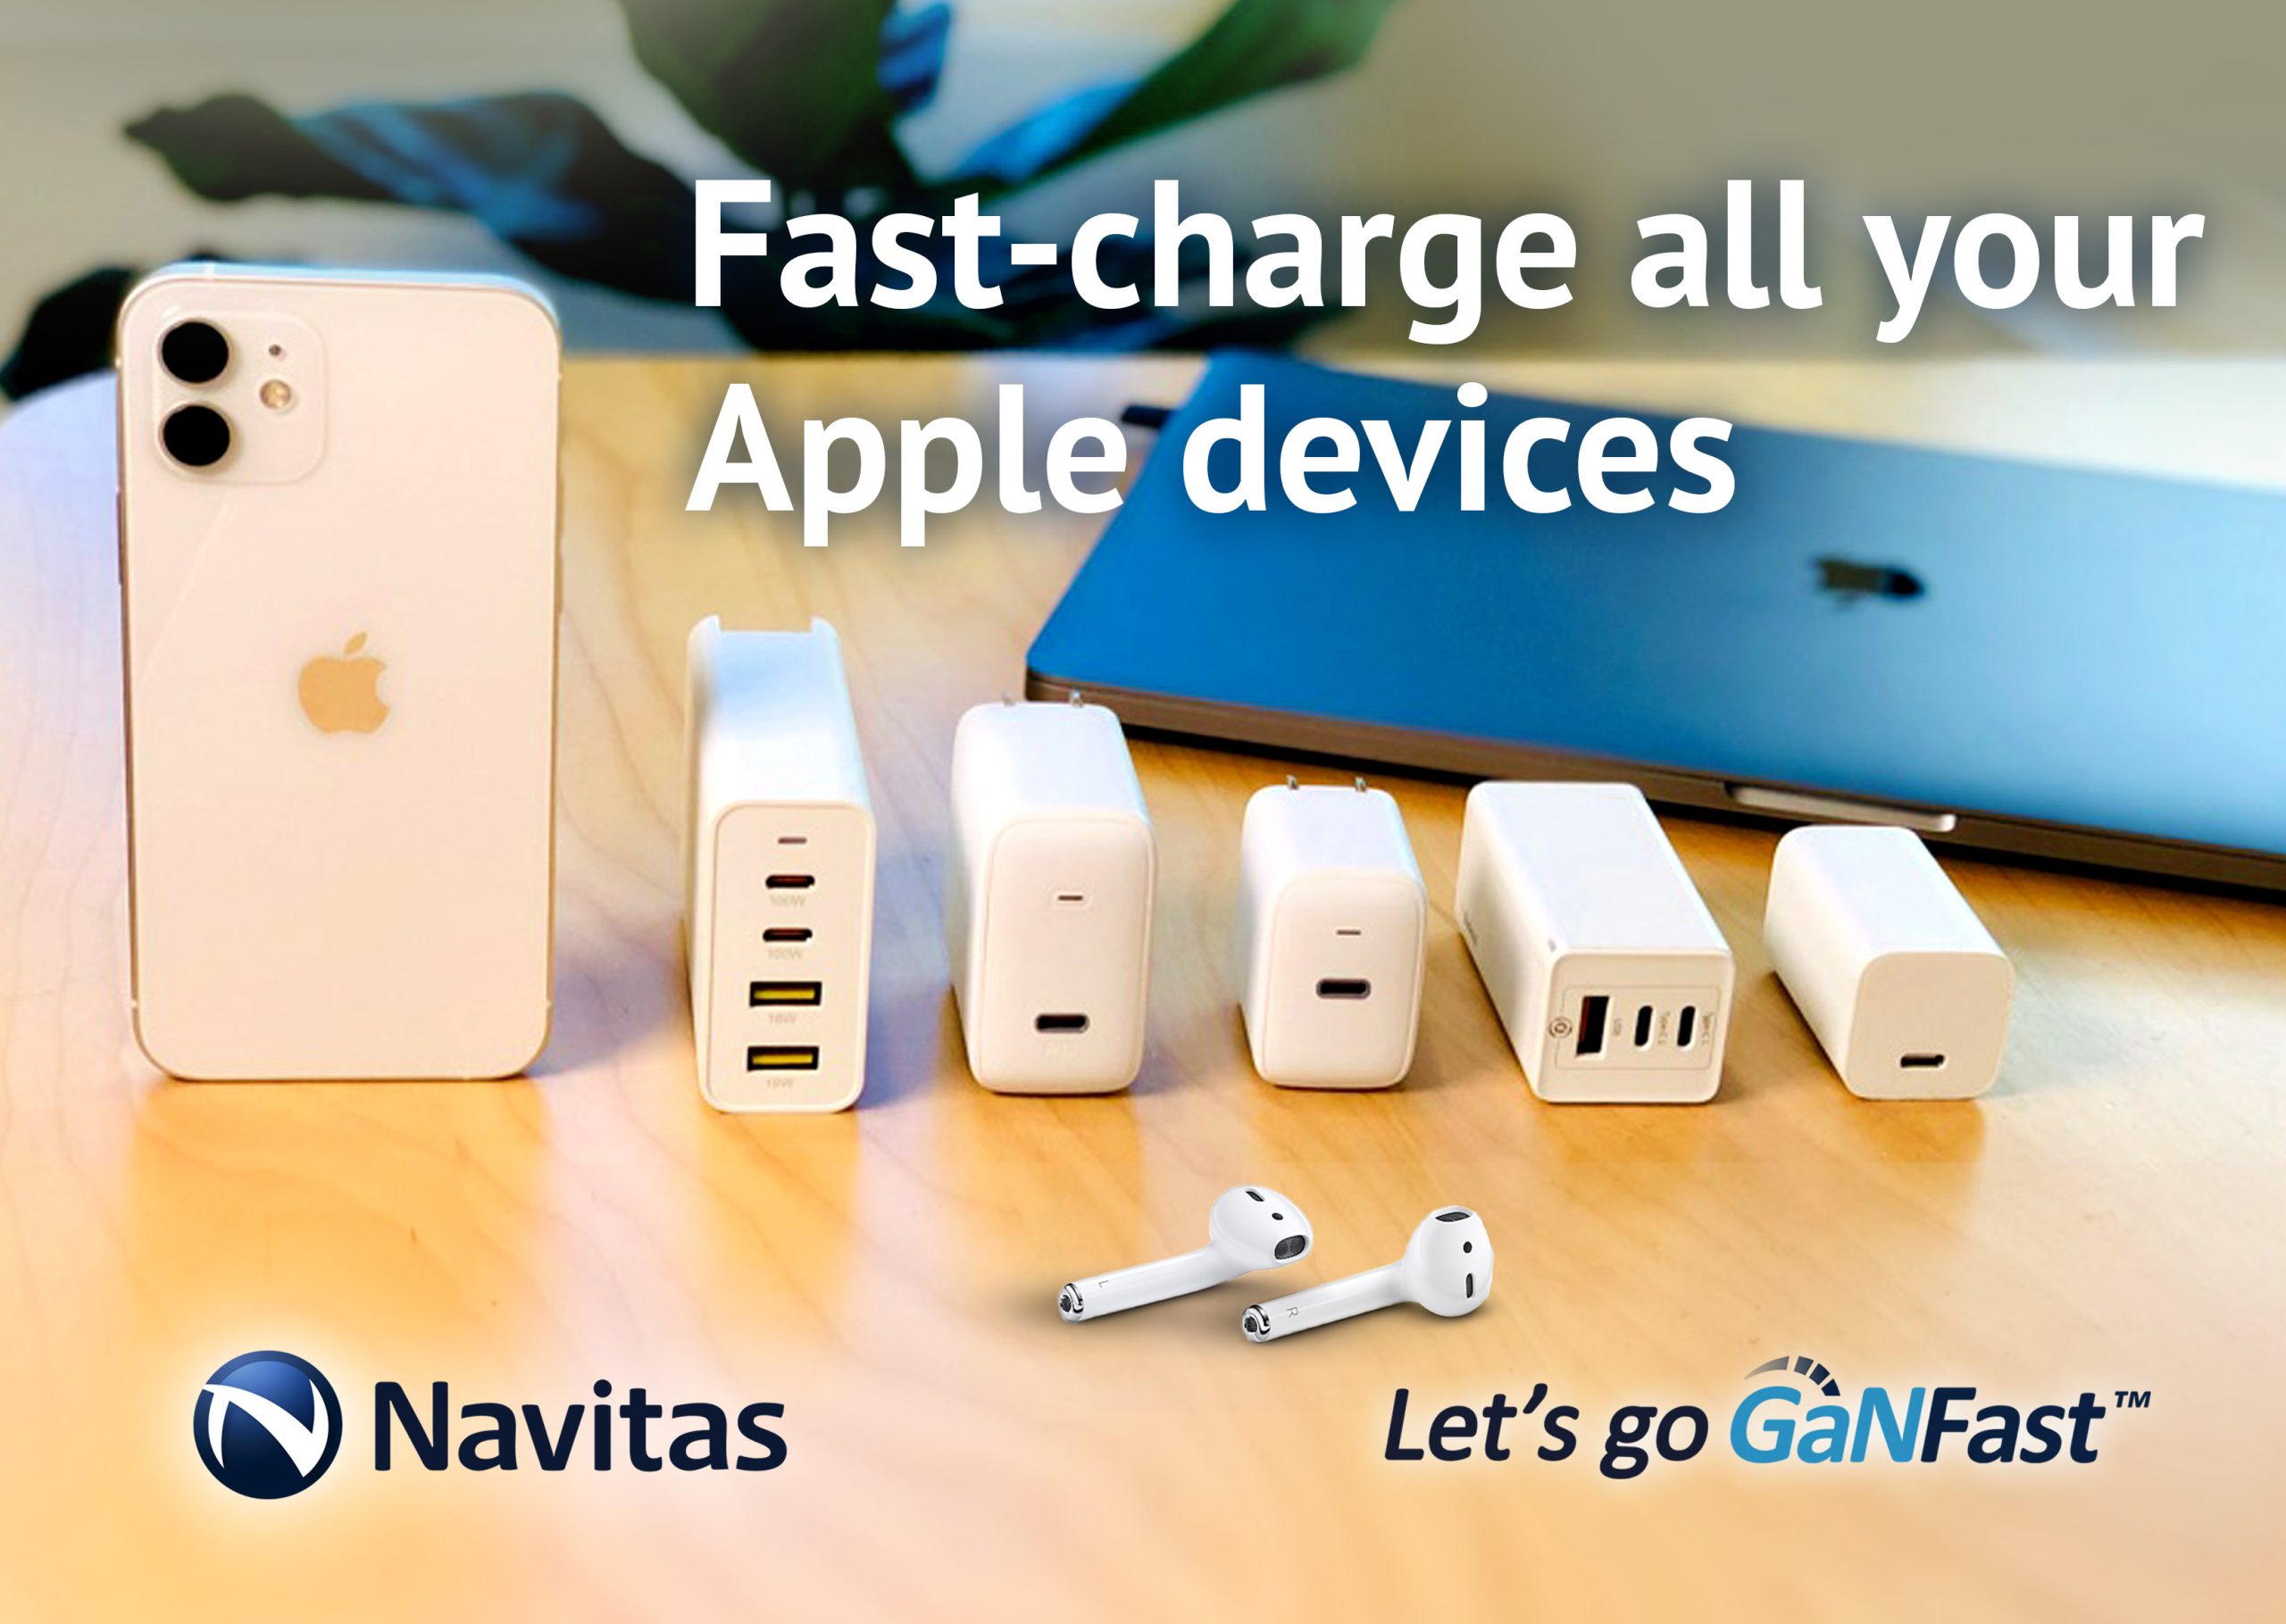 GaNFast Chargers Enable Apple iPhone 12 High-Speed Charging Compatibility